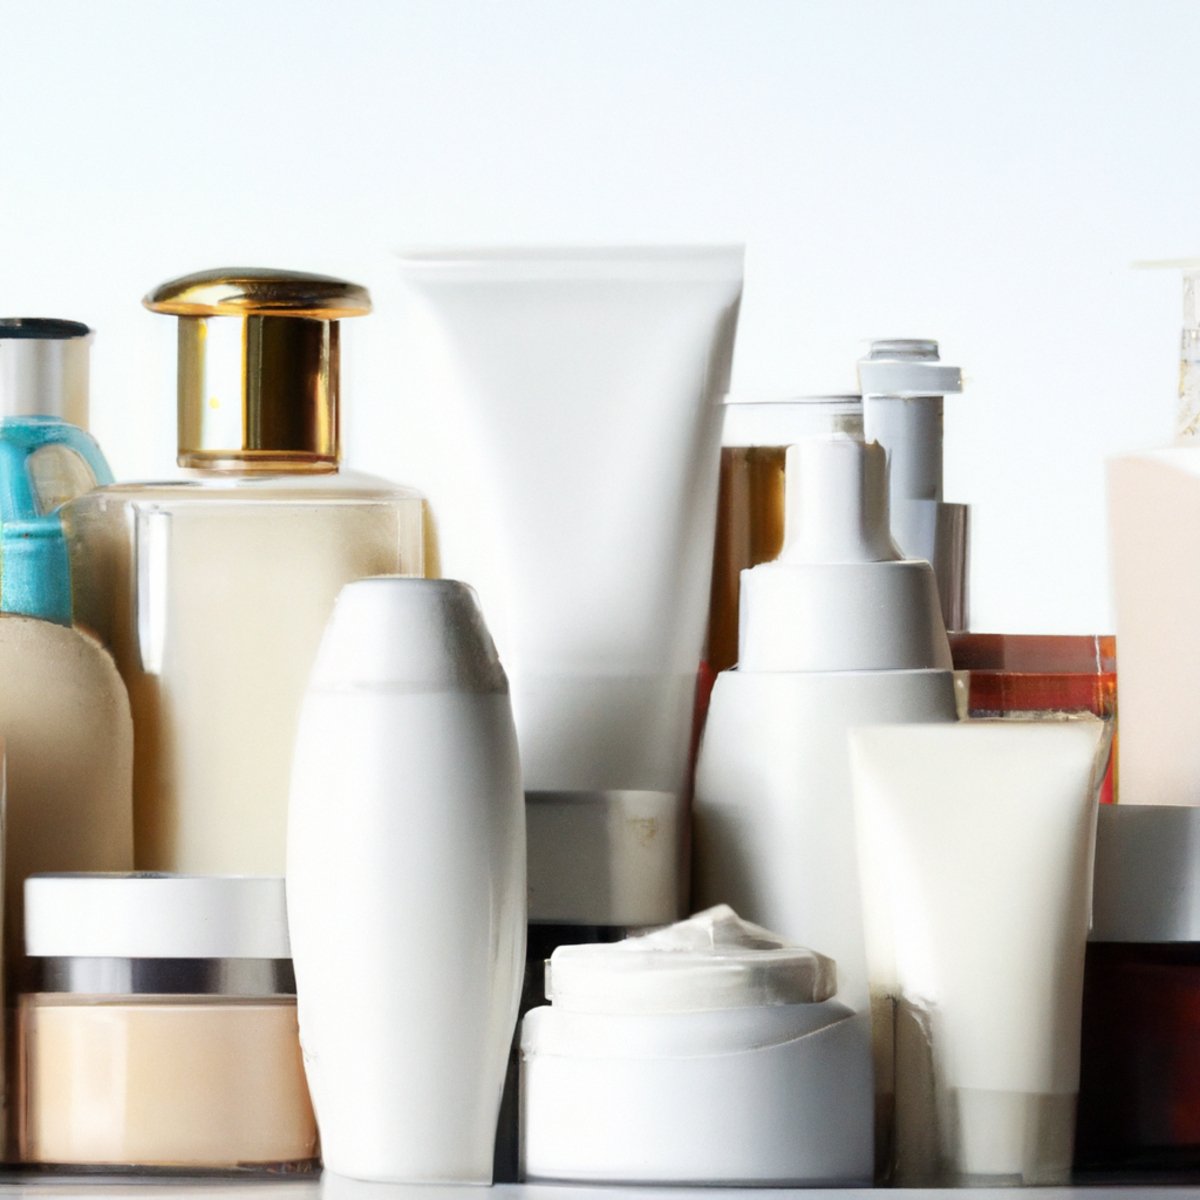 Skincare products for managing Harlequin Ichthyosis: moisturizers, emollients, and cleansers neatly arranged on white surface.